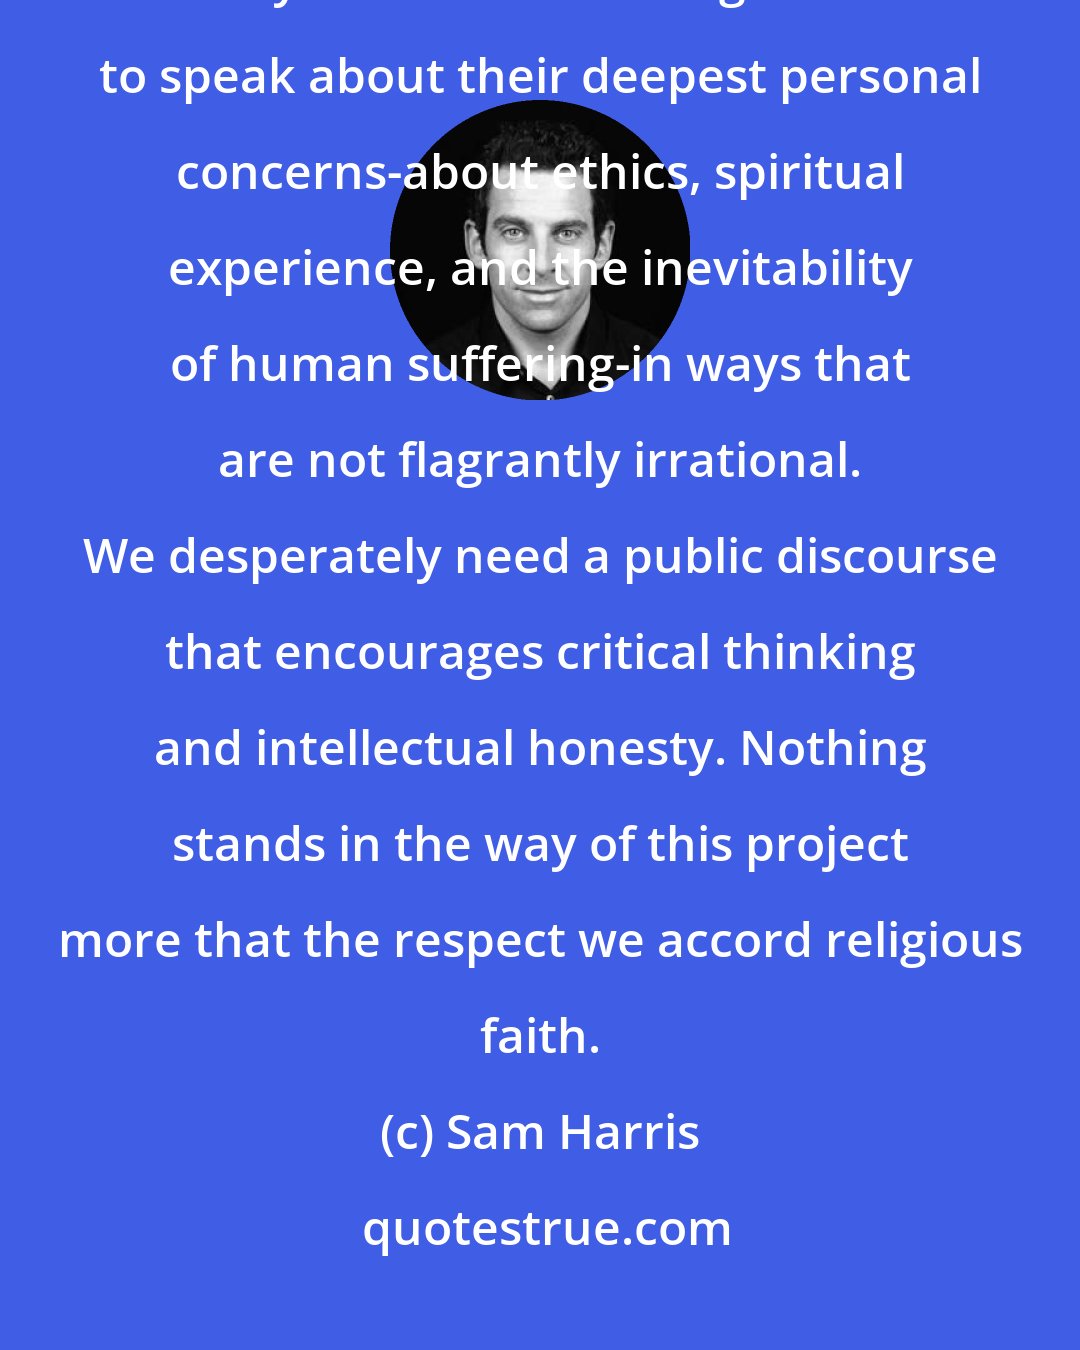 Sam Harris: One of the greatest challenges facing civilization in the twenty-first century is for human beings to learn to speak about their deepest personal concerns-about ethics, spiritual experience, and the inevitability of human suffering-in ways that are not flagrantly irrational. We desperately need a public discourse that encourages critical thinking and intellectual honesty. Nothing stands in the way of this project more that the respect we accord religious faith.